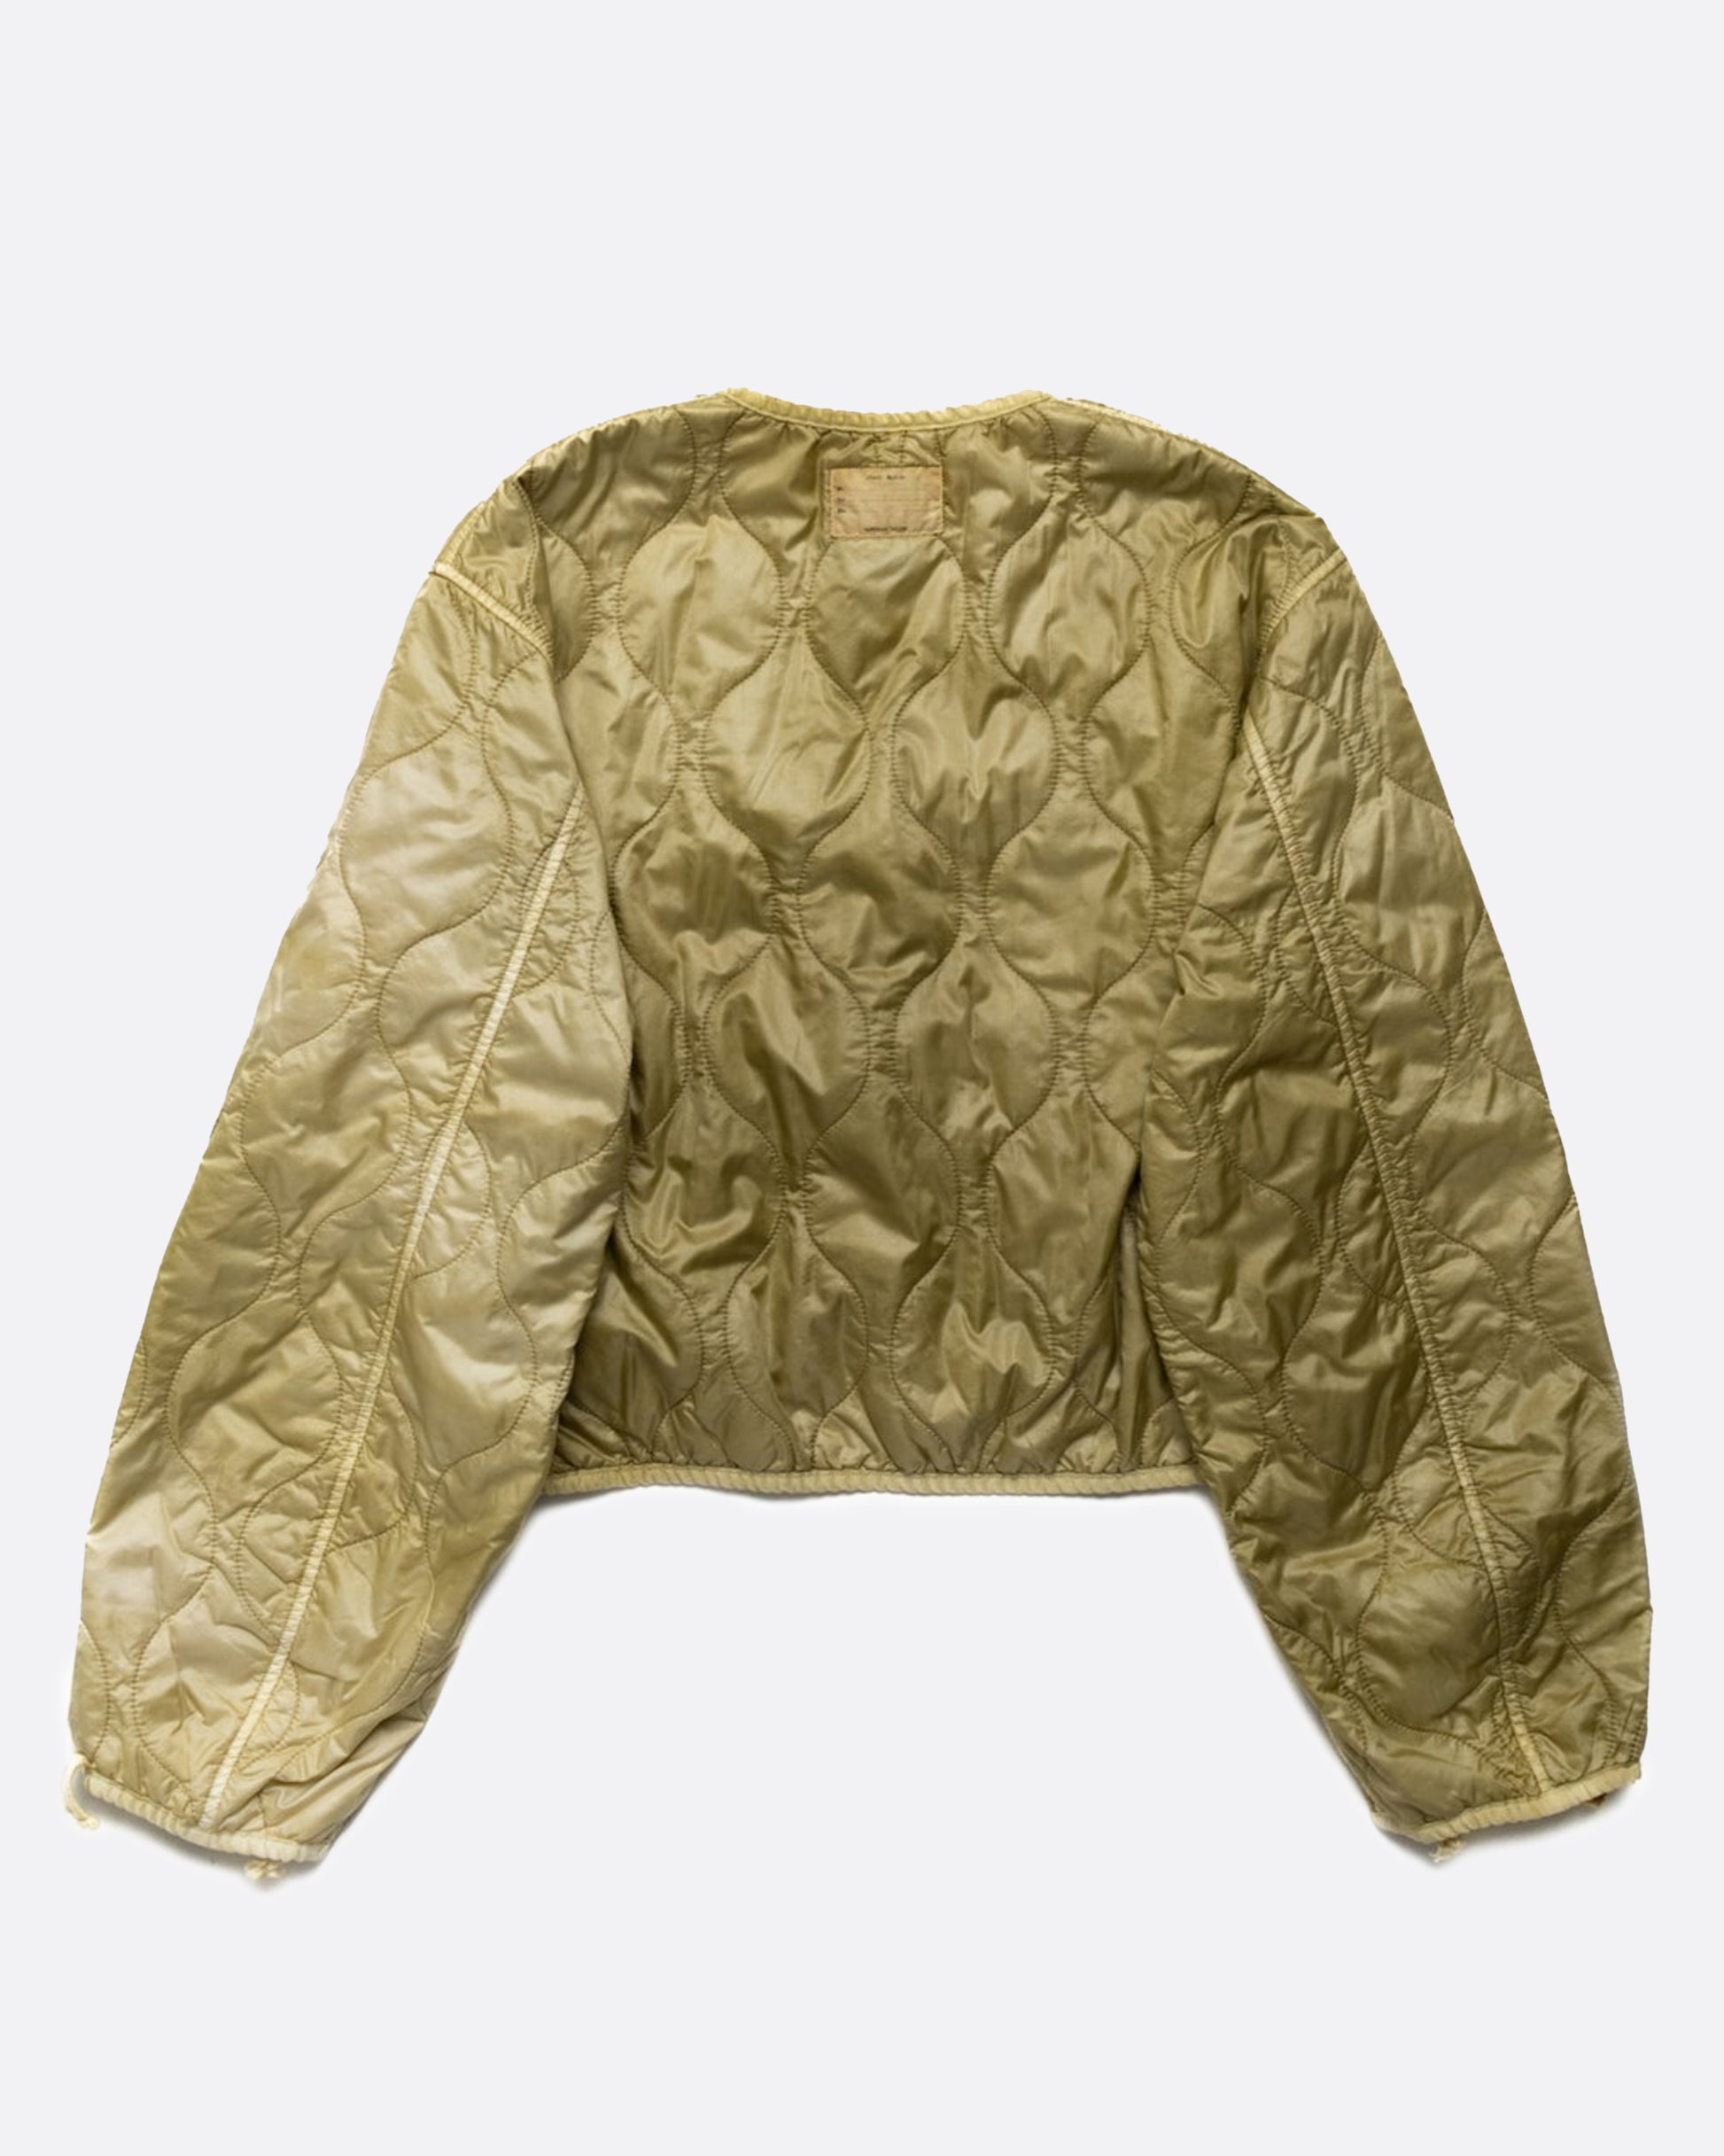 A nylon, quilted, dip-dyed bolero jacket in an olive-y khaki - your new everyday jacket!